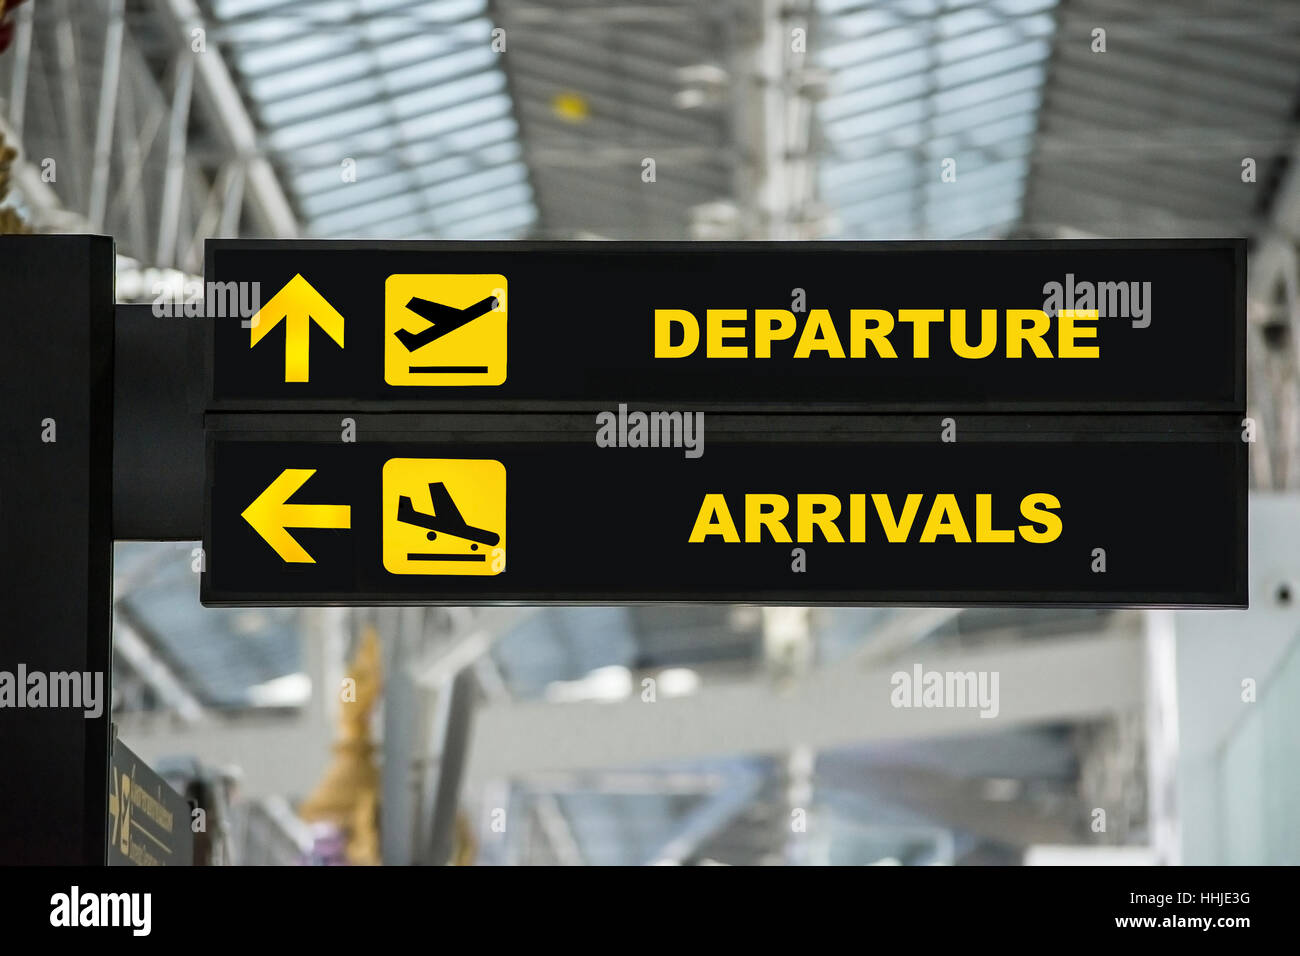 Airport Departure & Arrival information board sign in terminal at airport. Stock Photo